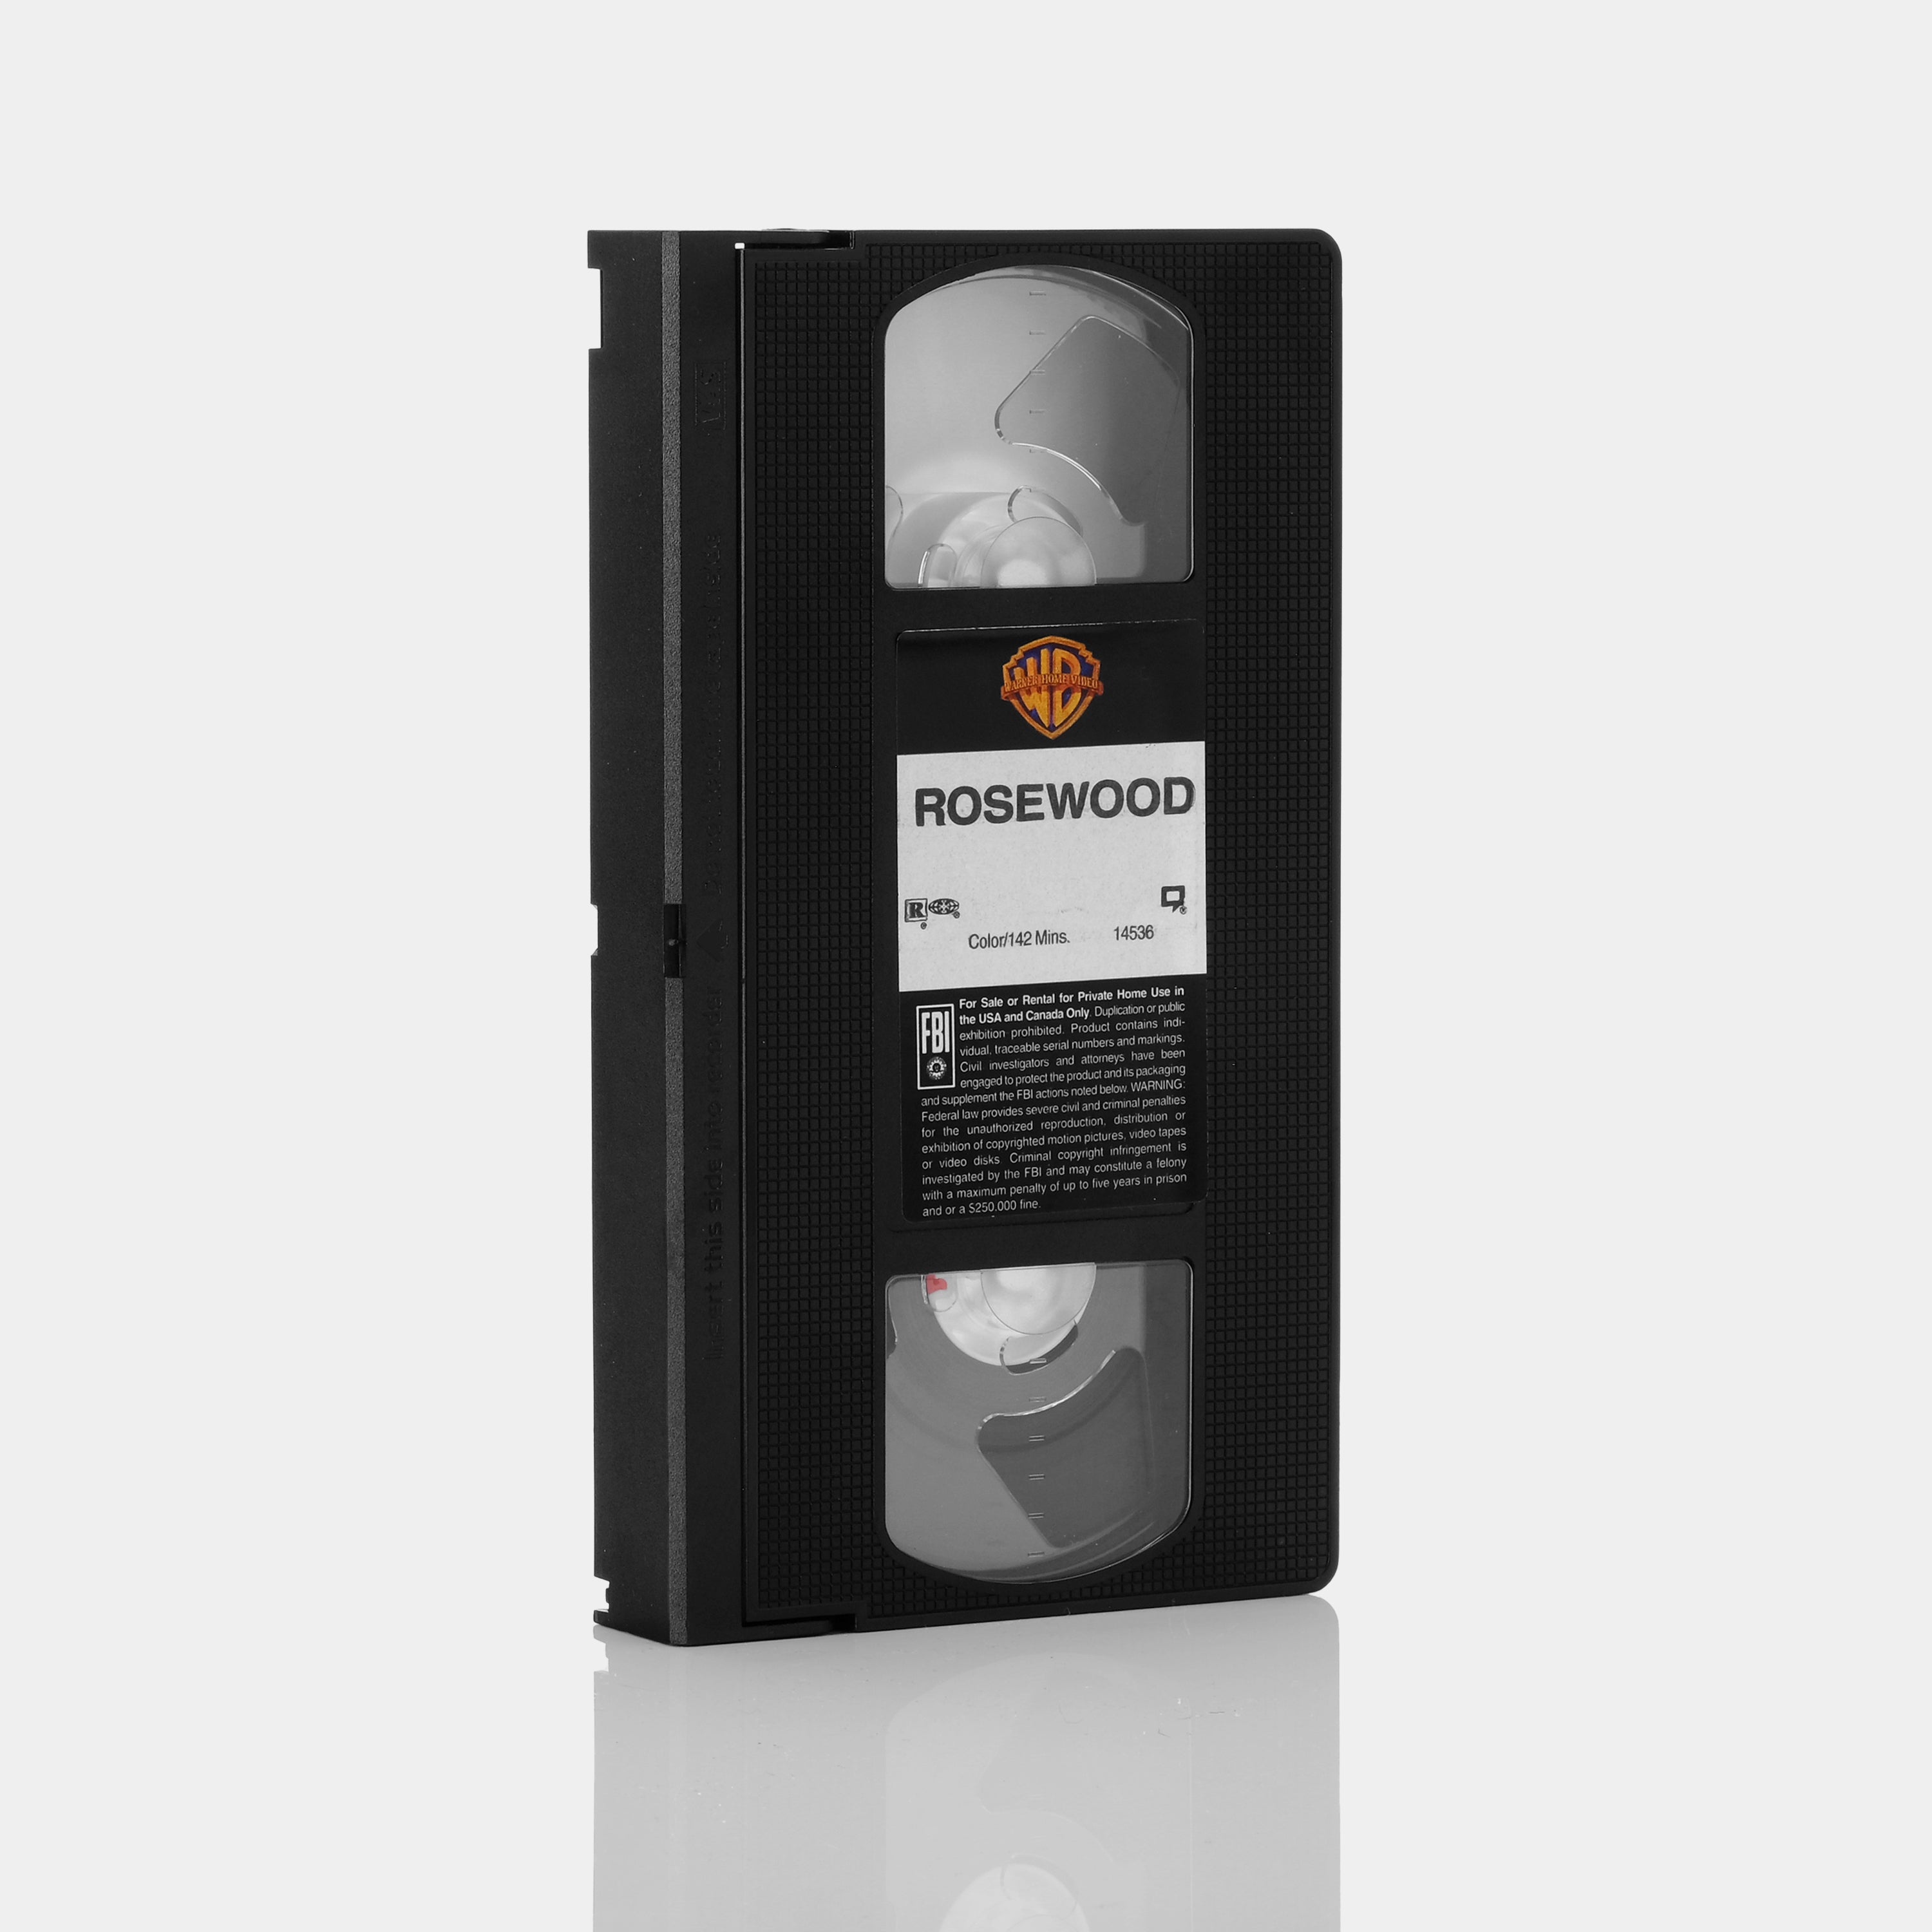 Rosewood VHS Tape